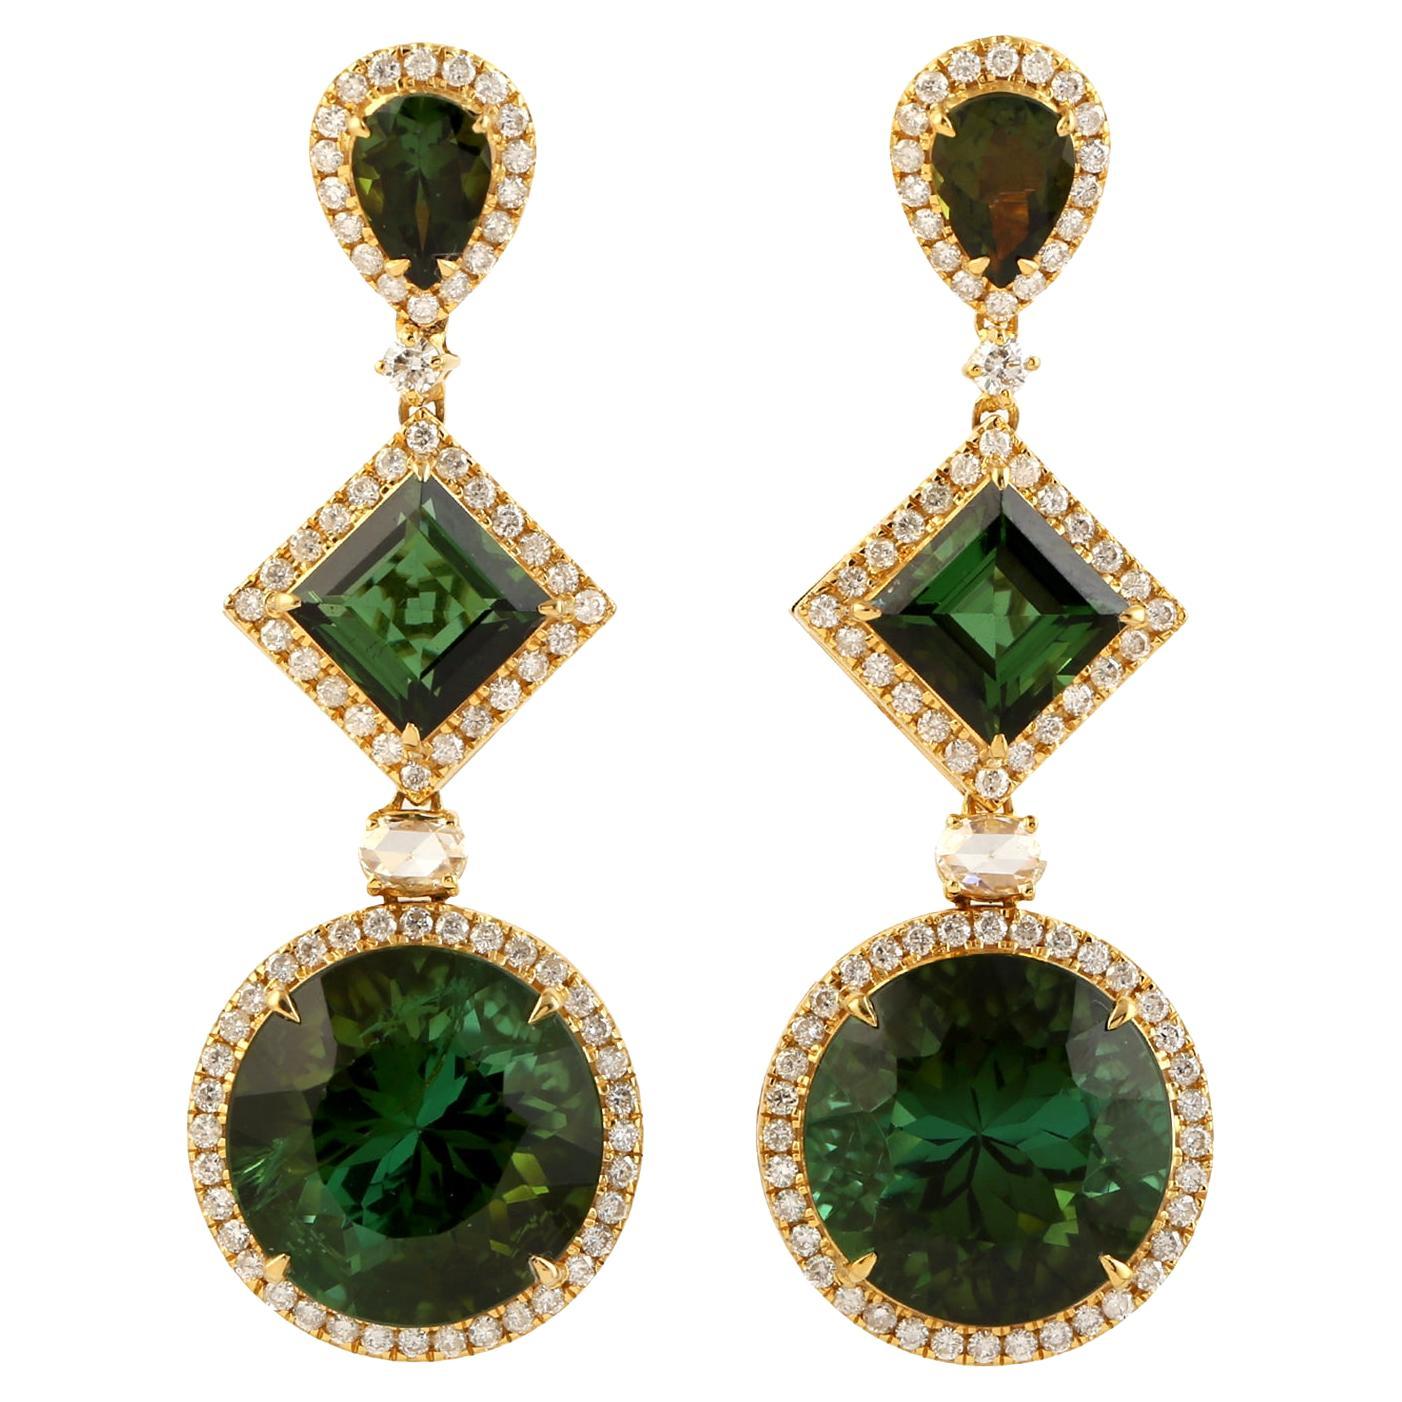 Three Tier Multi Shaped Green Tourmaline Earrings With Diamonds In 18k Gold For Sale